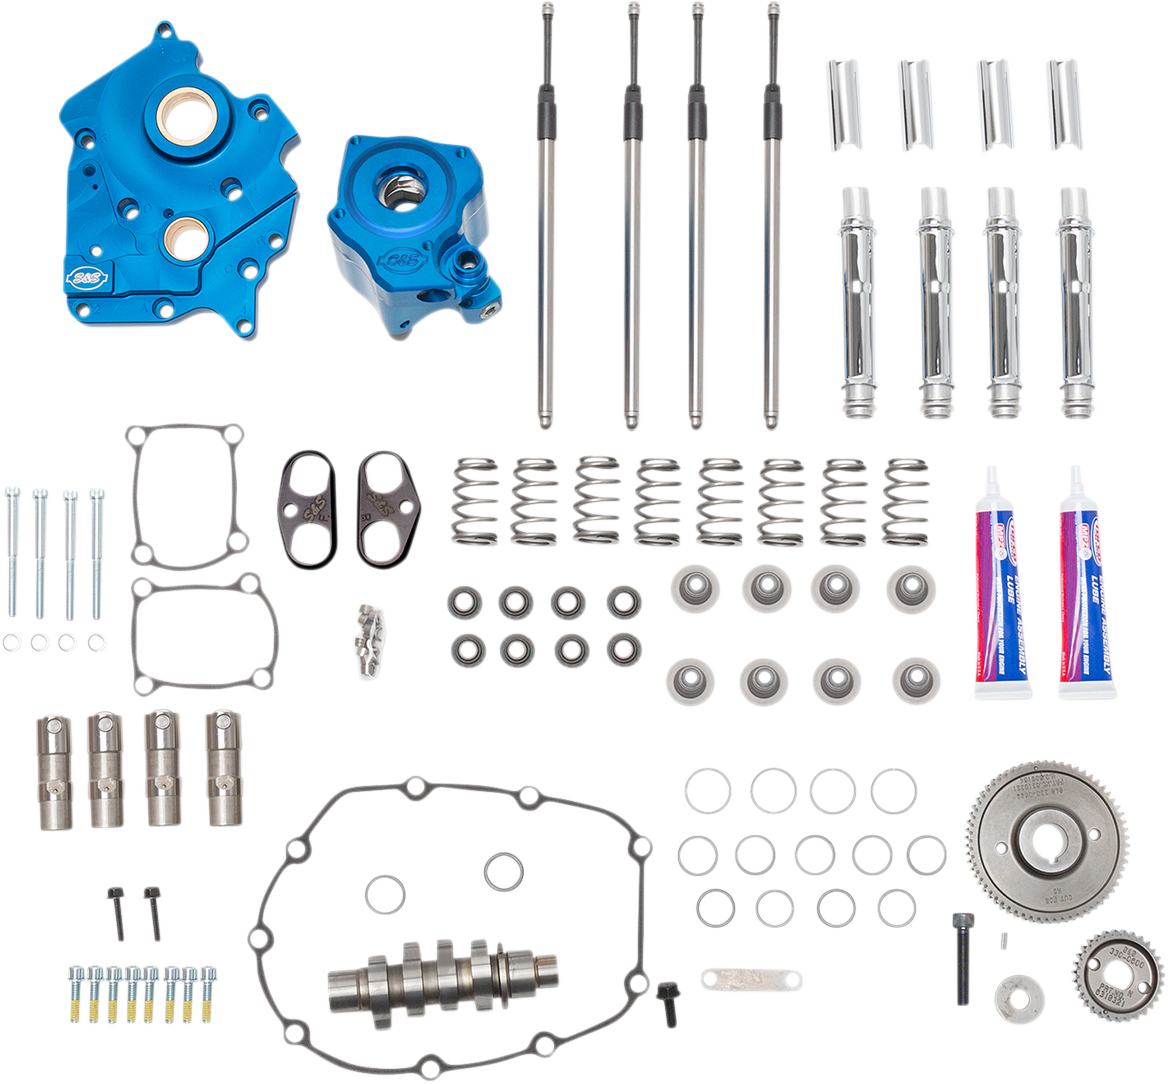 S&S CYCLE Cam Chest Kit with Plate M8 - Gear Drive - Oil Cooled - 550 Cam - Chrome Pushrods 310-1083A